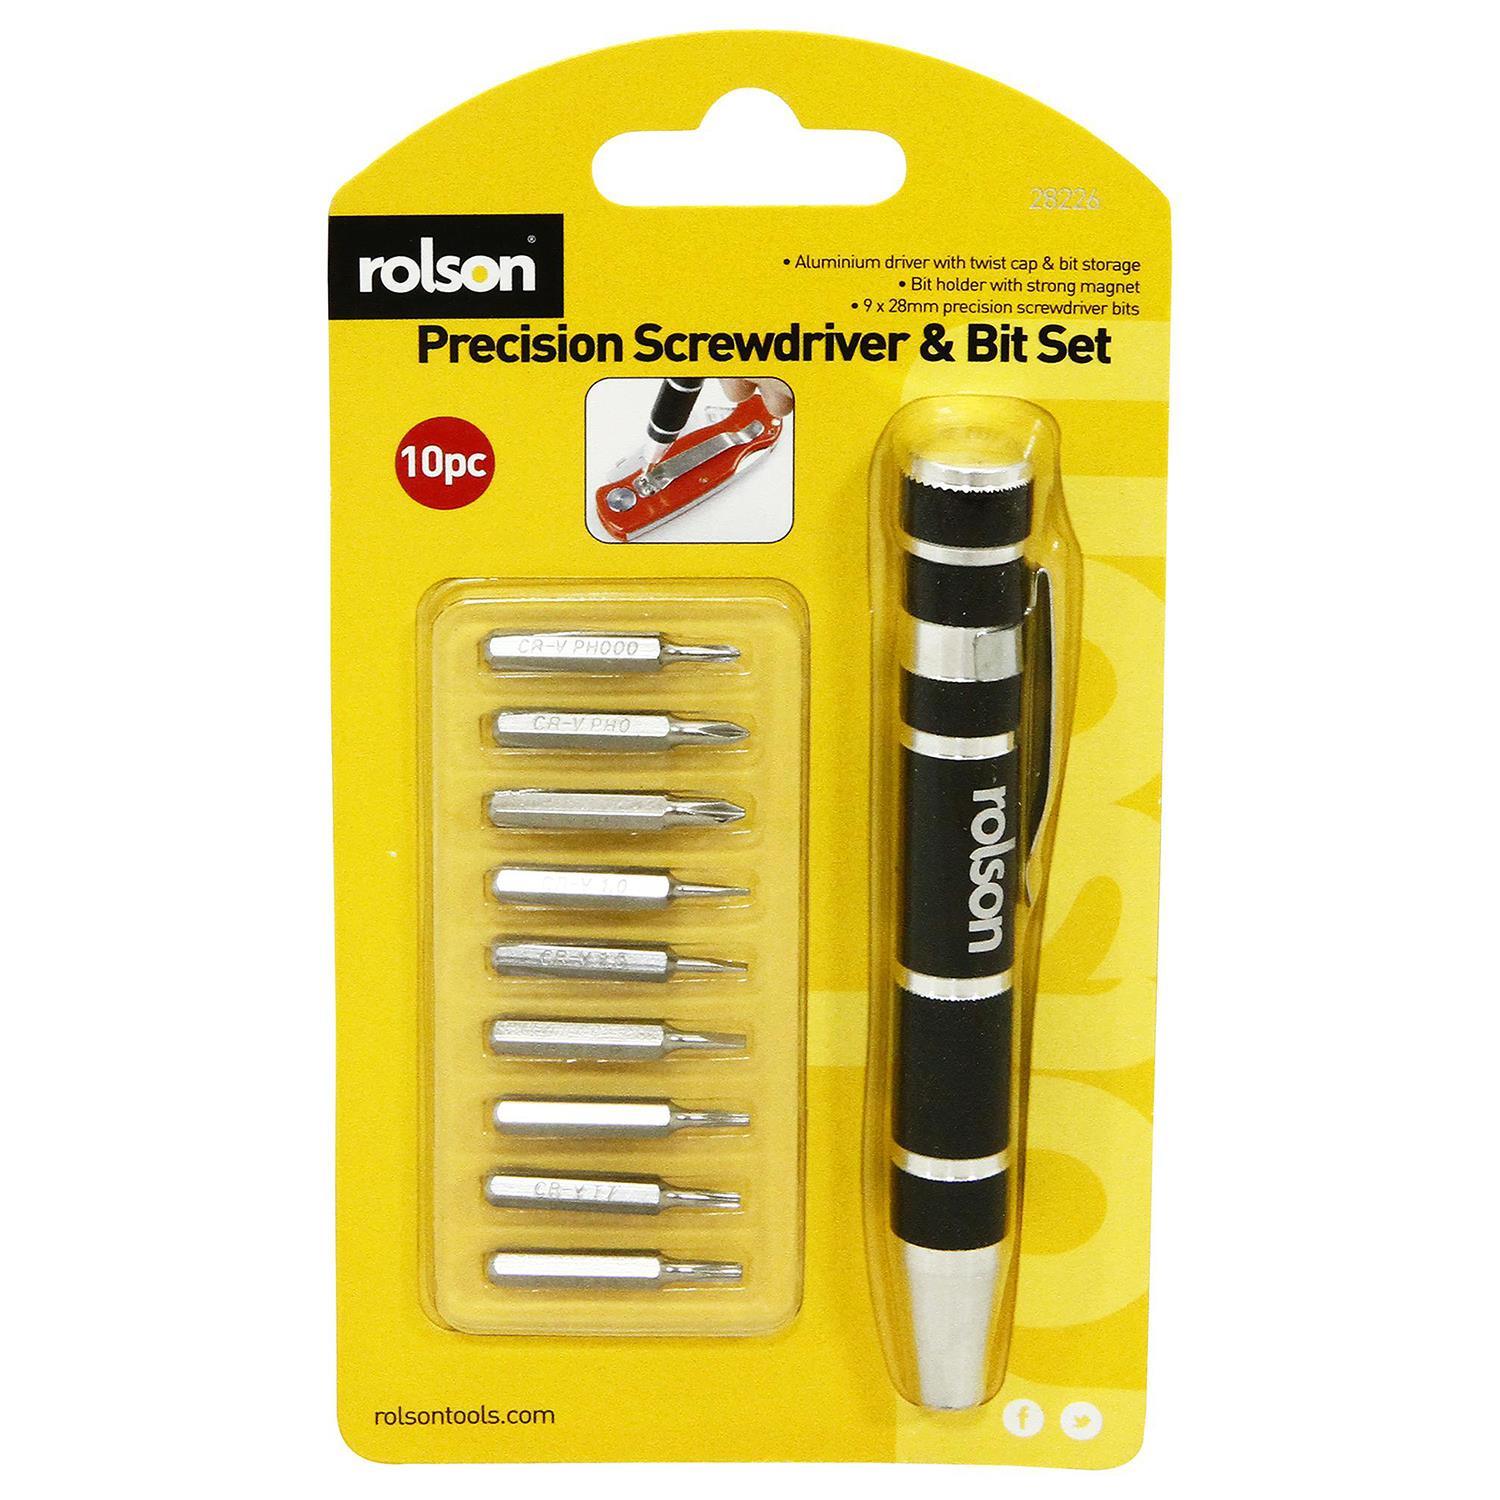 Rolson 6 in 1 Precision Screwdriver Bit Set with LED Light - DY Pro Audio